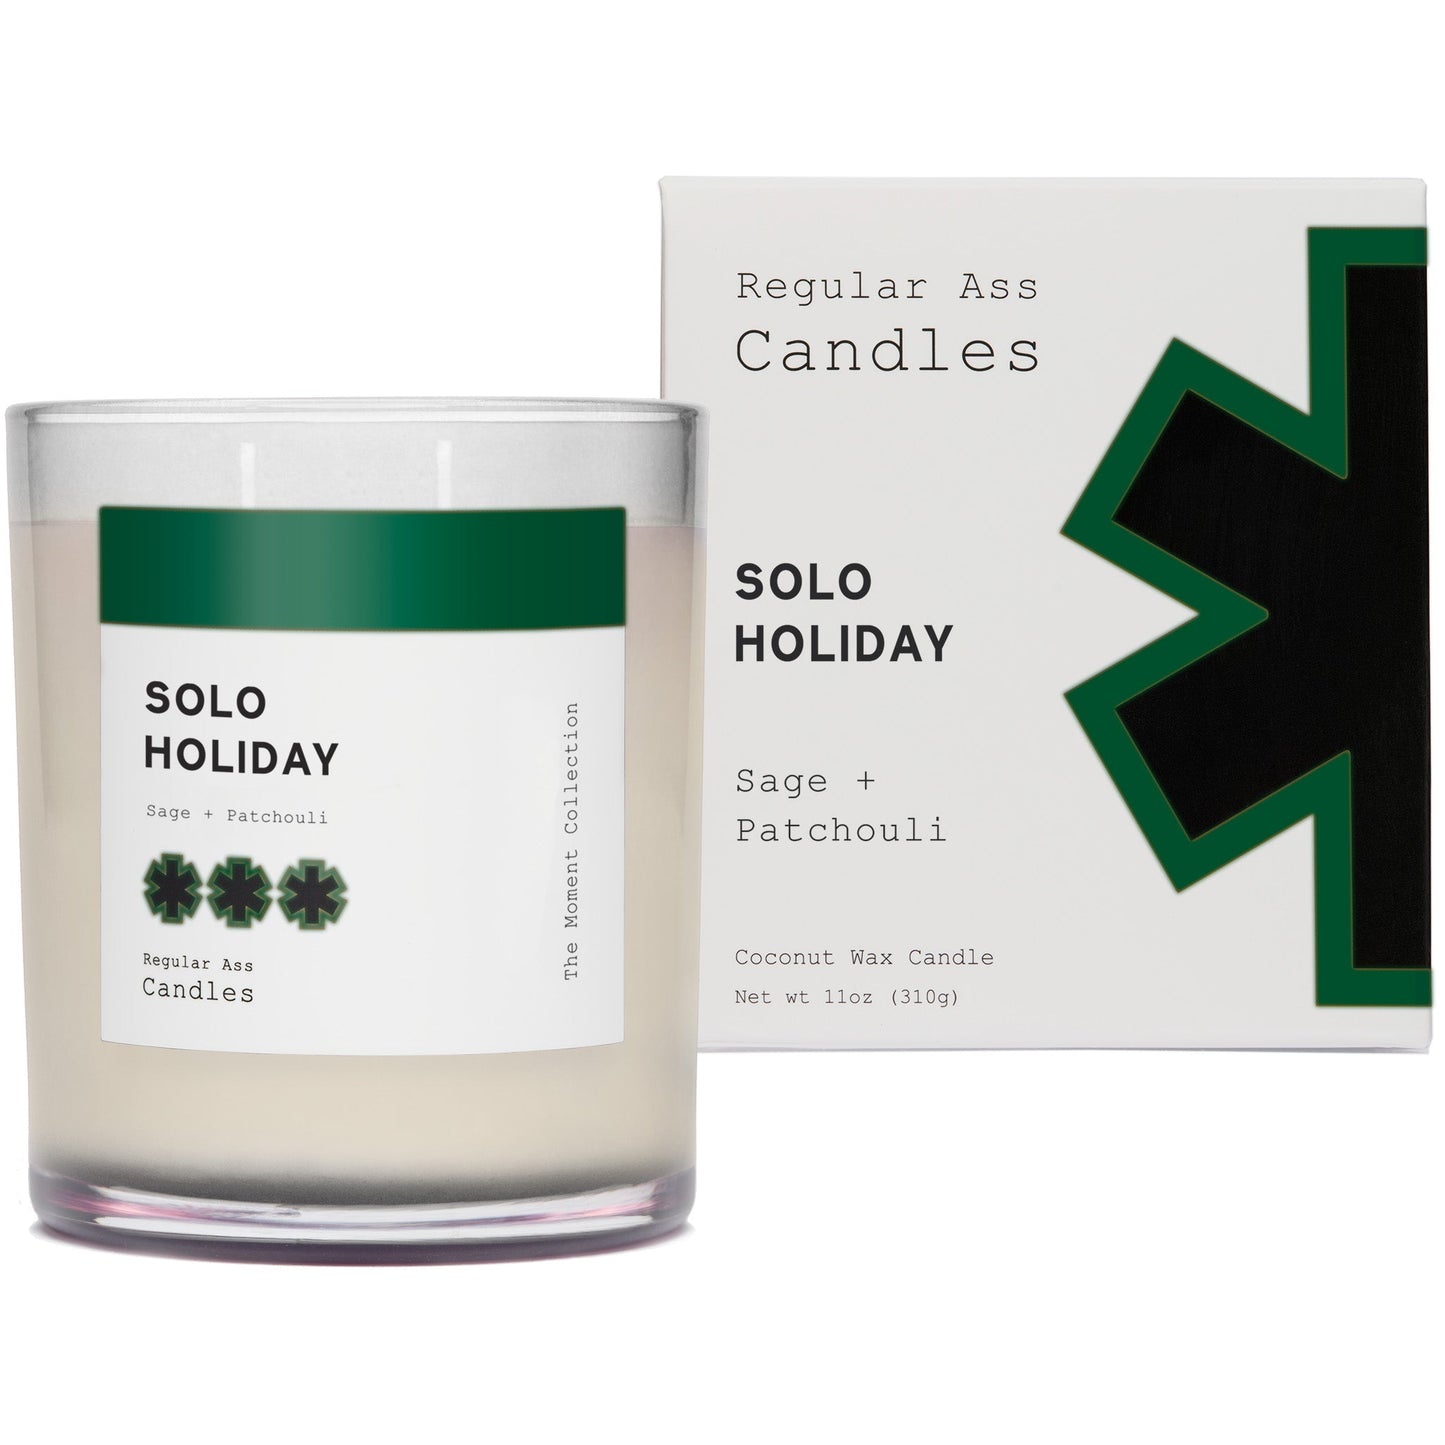 Solo Holiday, Sage + Patchouli 11oz Candle